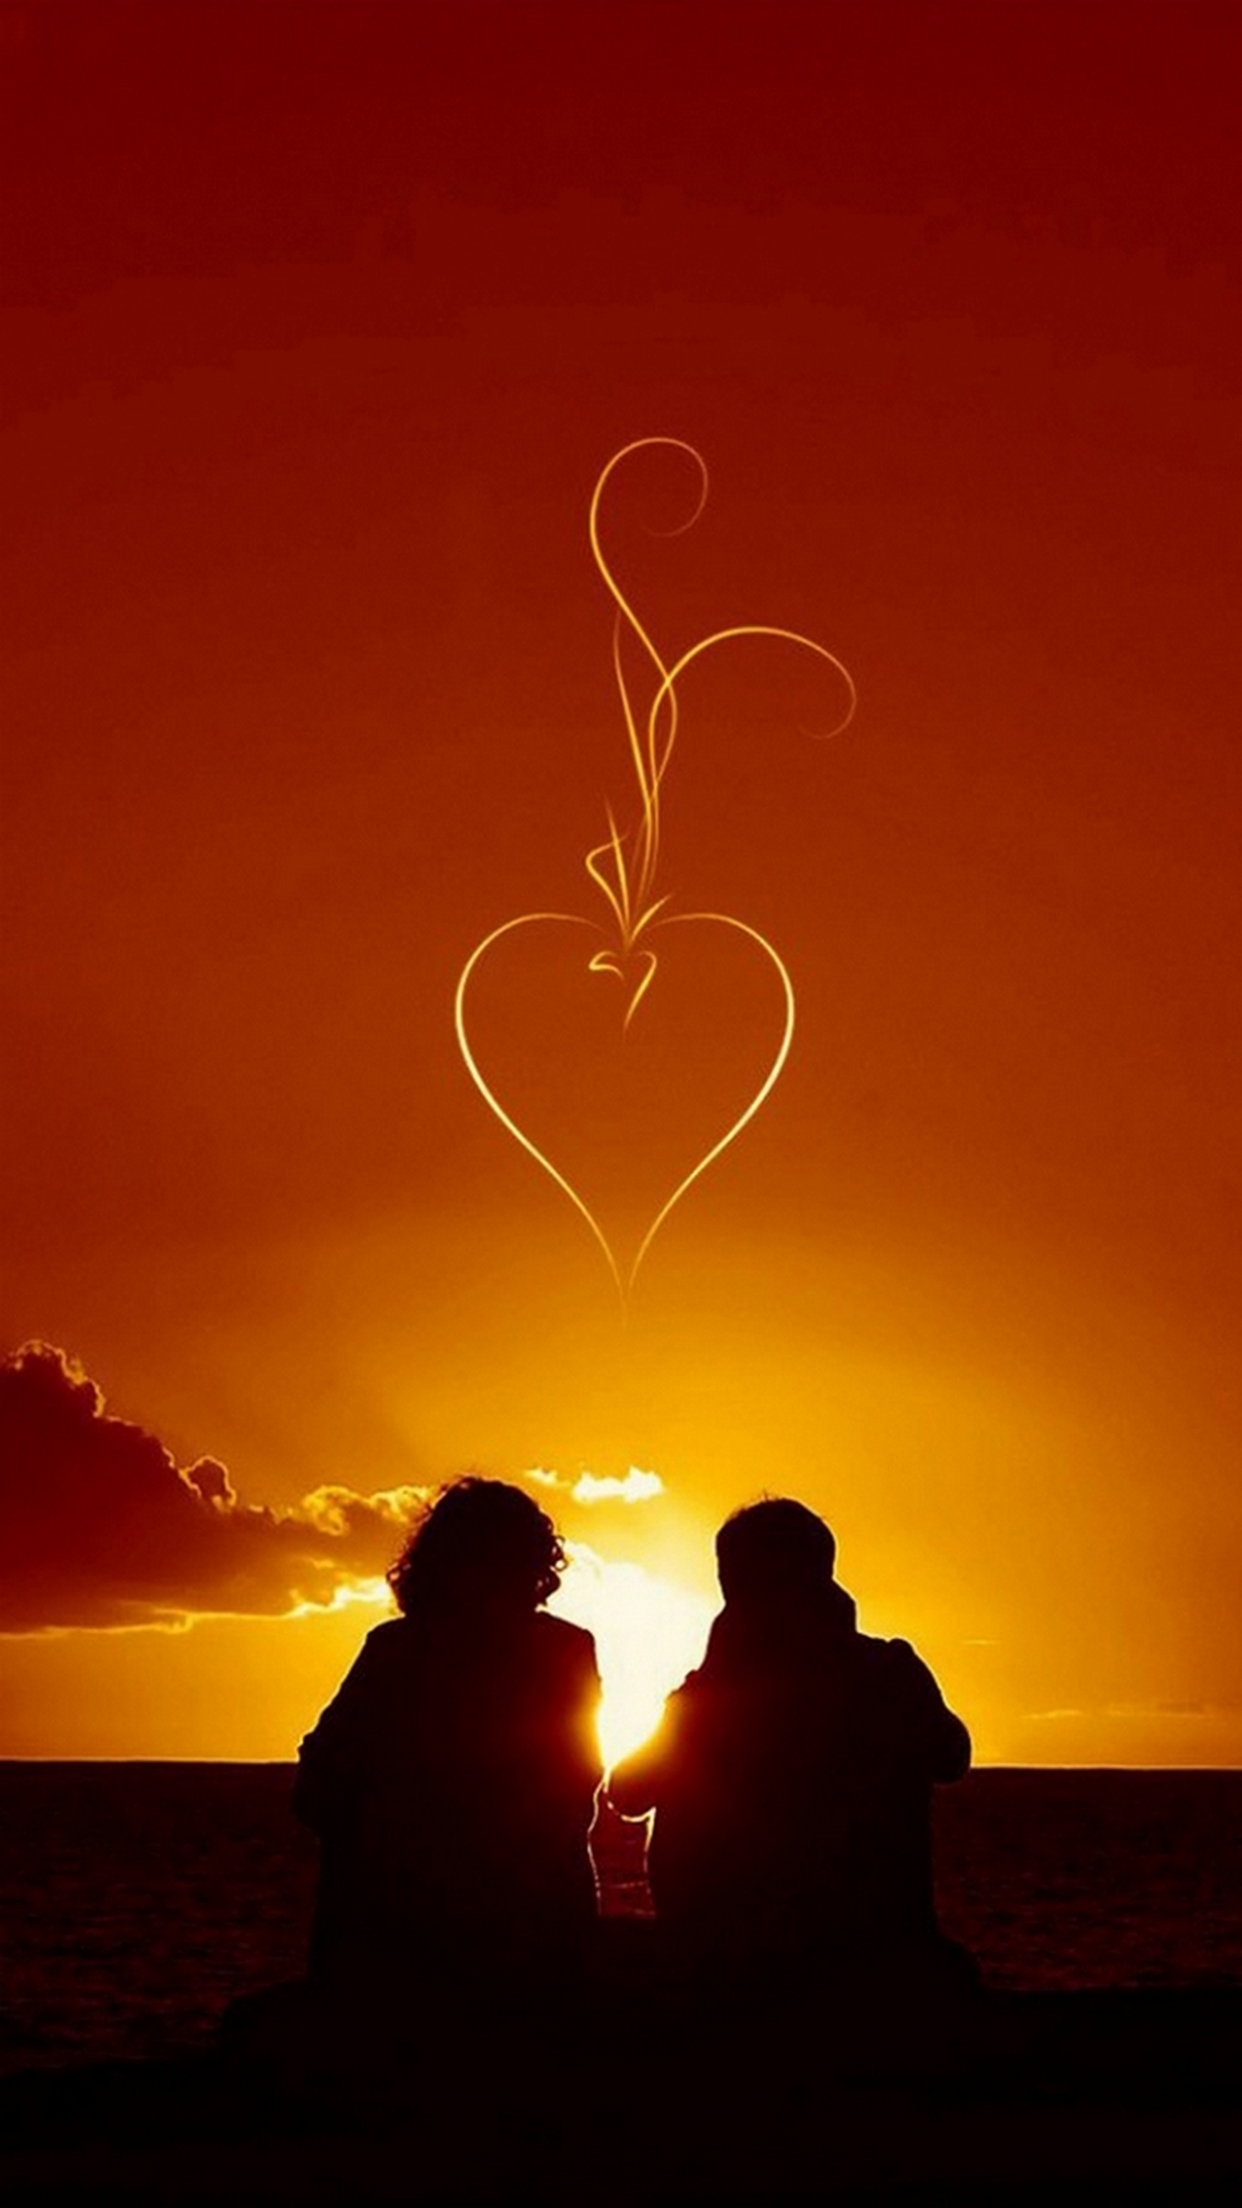 Cute Couple Love IphoneWallpapers